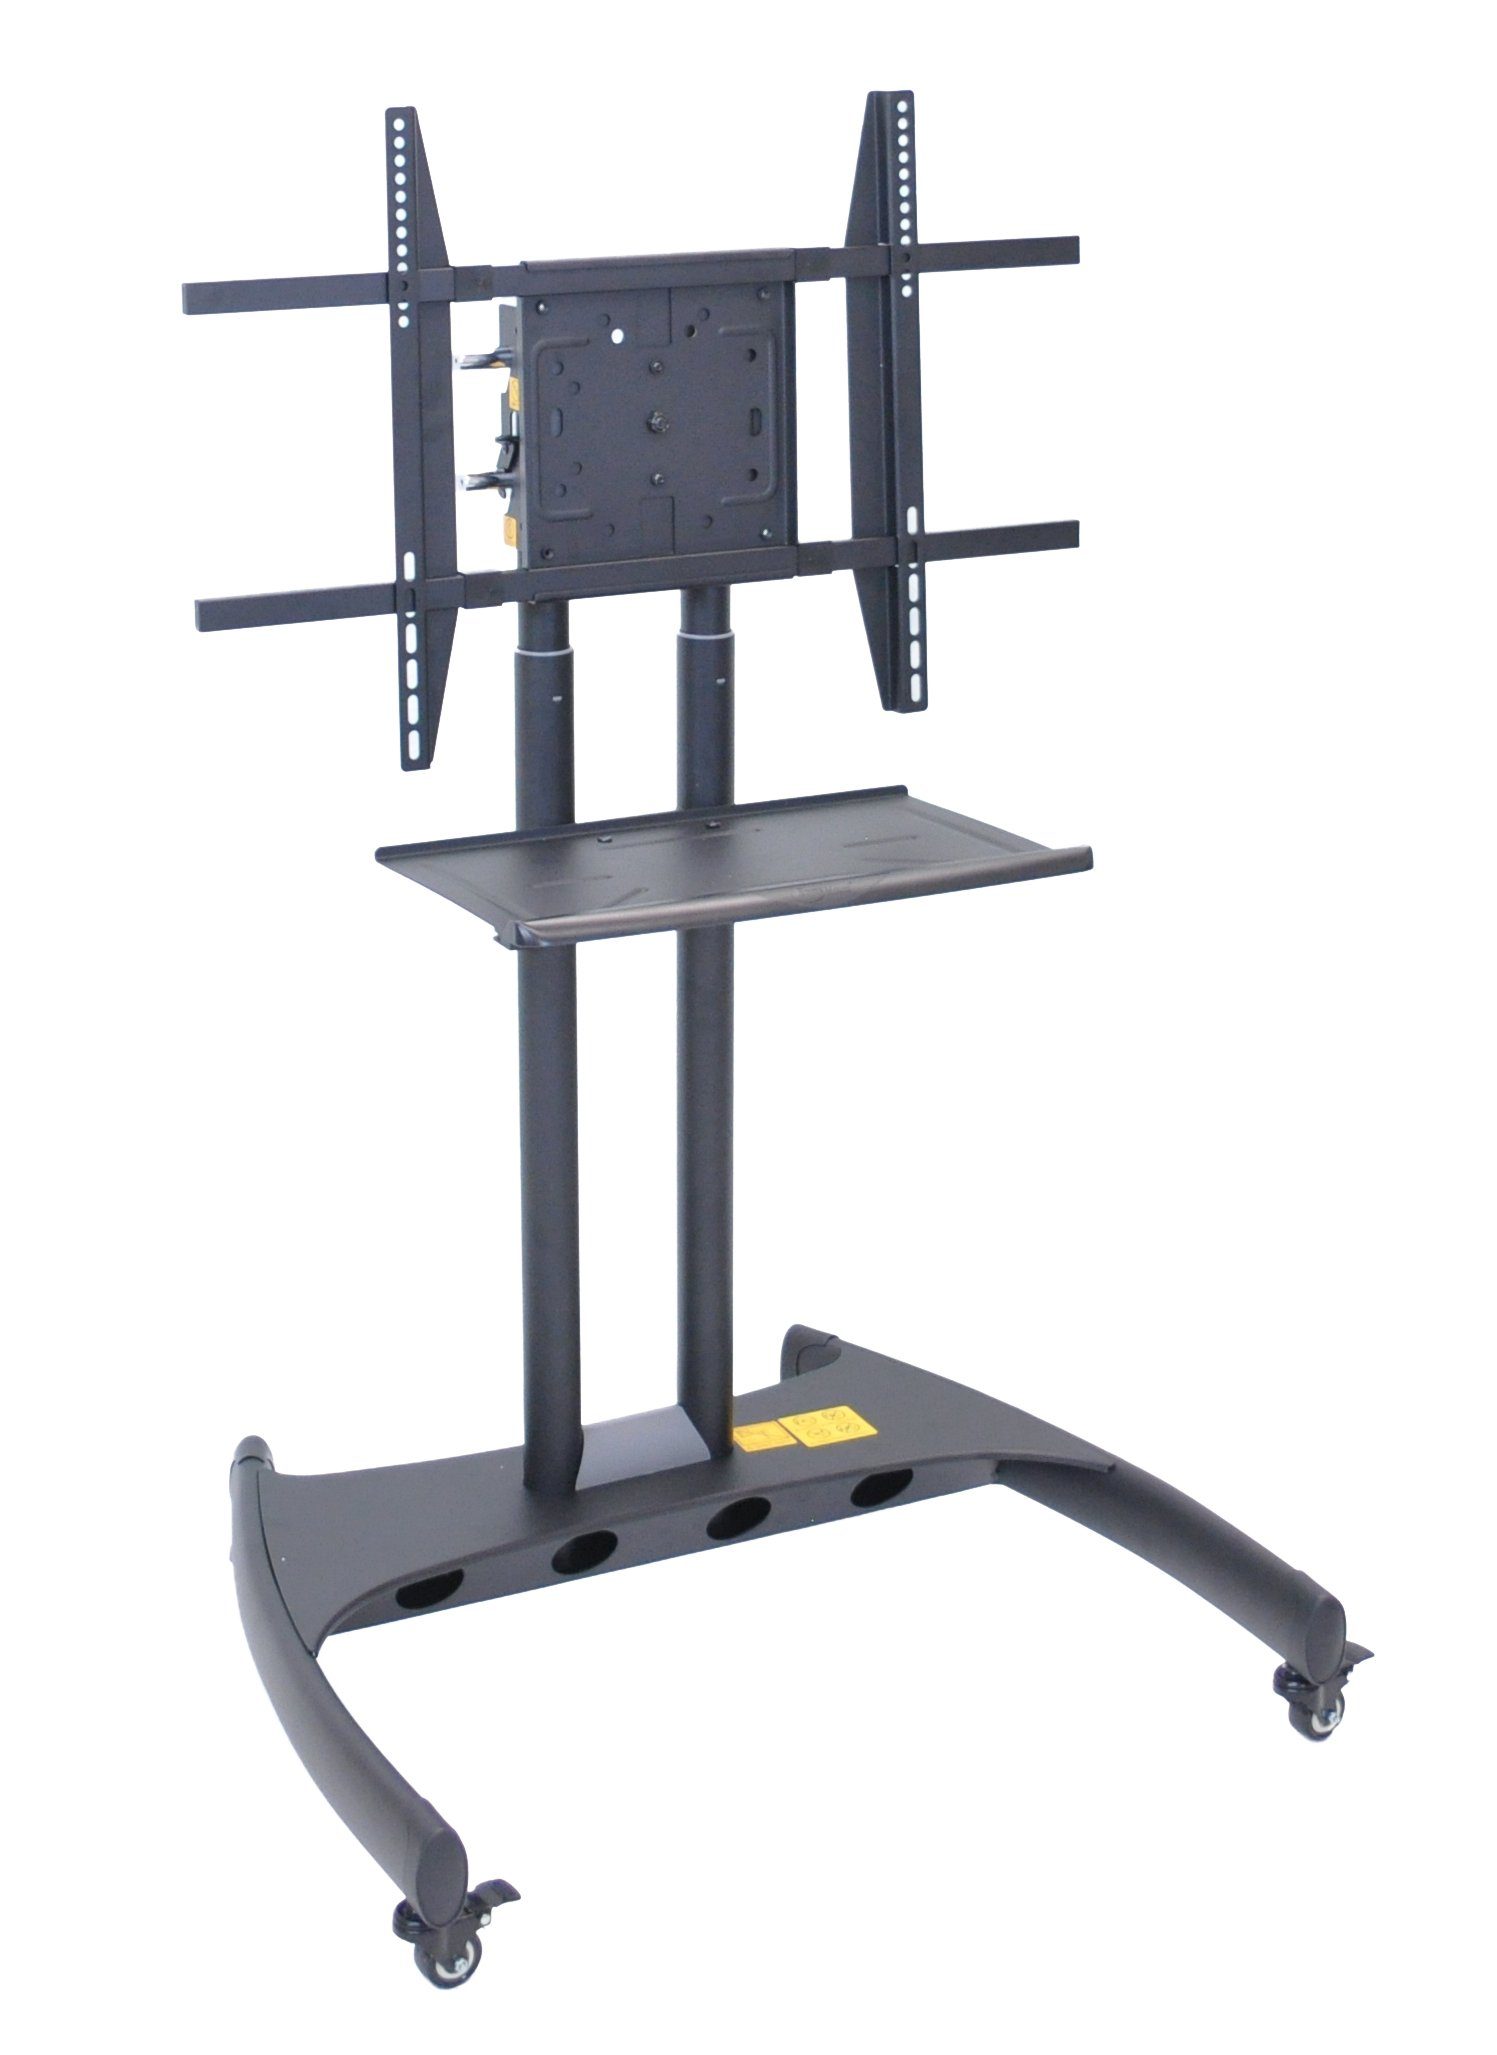 Luxor Adjustable Height Flat Panel Cart W/ Accessory Shelf And 90 Degree Rotating Mount